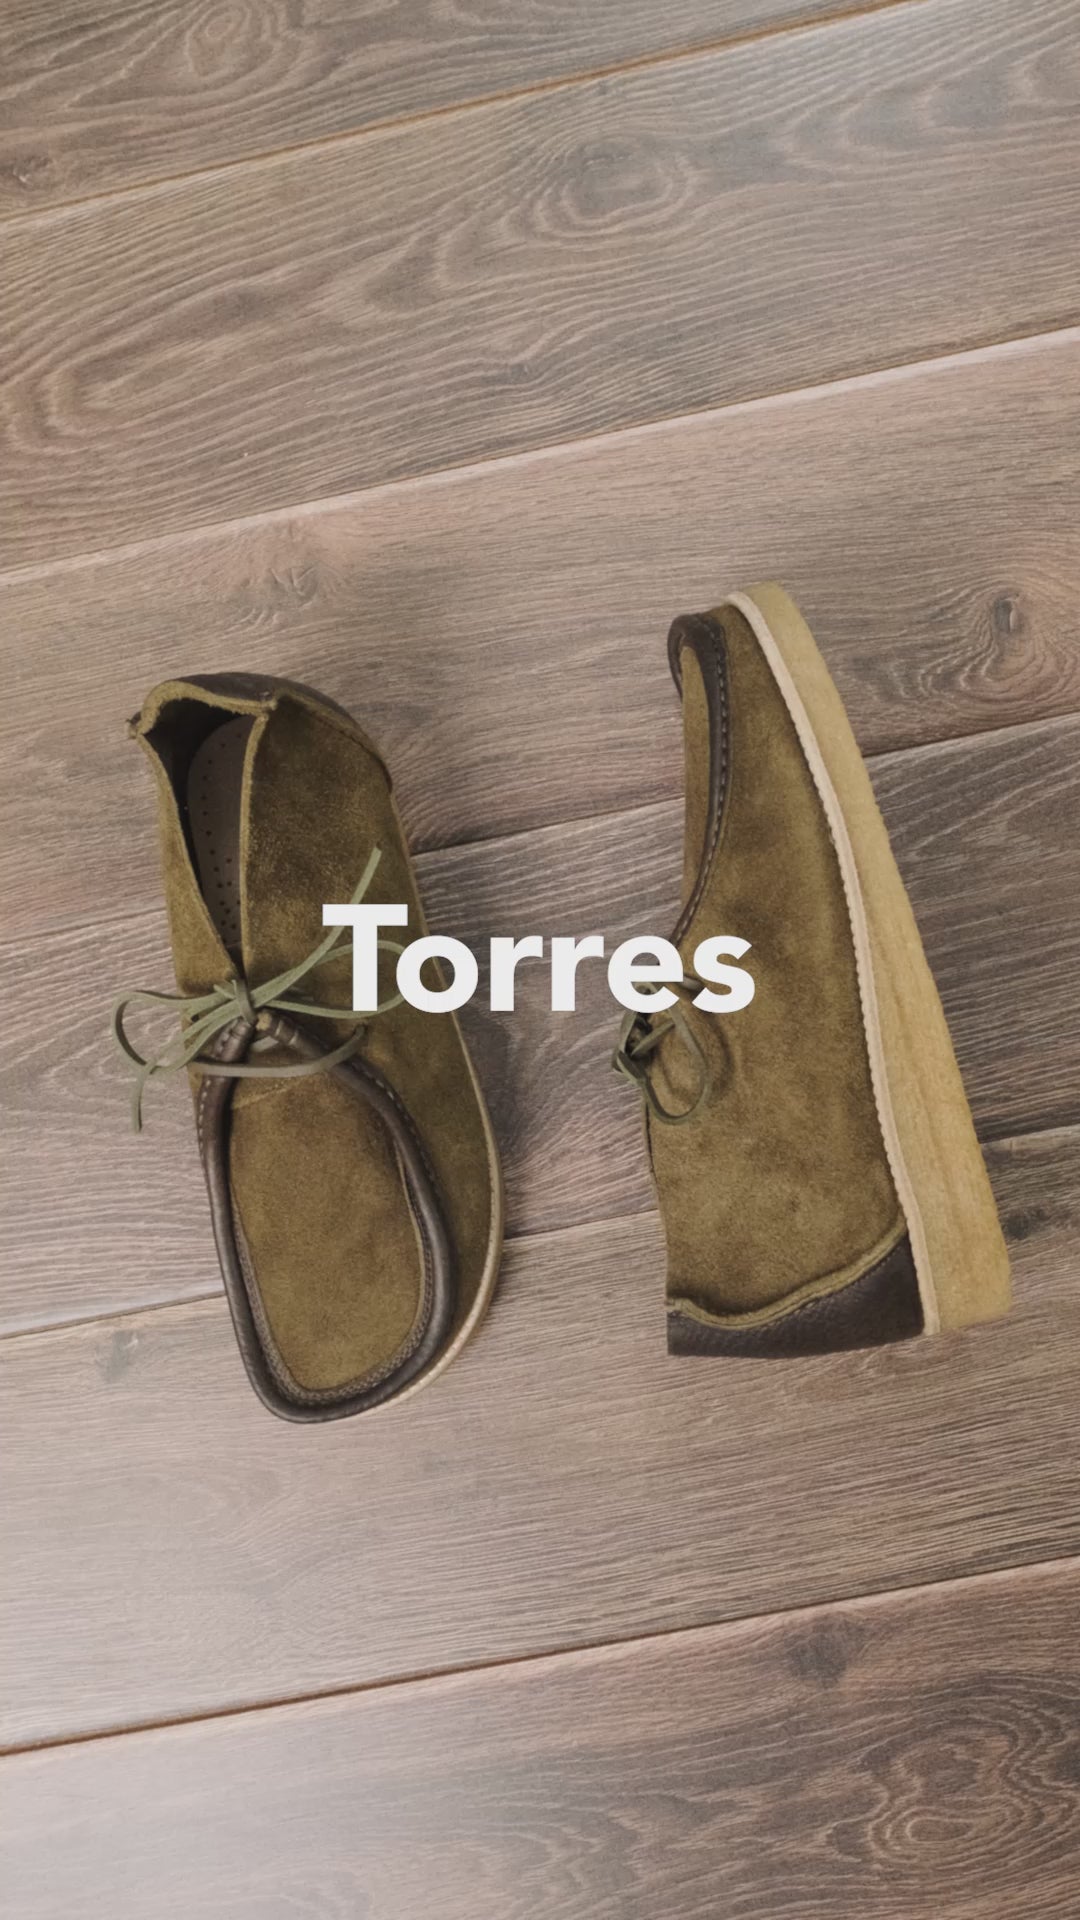 Yogi Torres LeatherSuede Boot on Crepe - Moss Green - Video